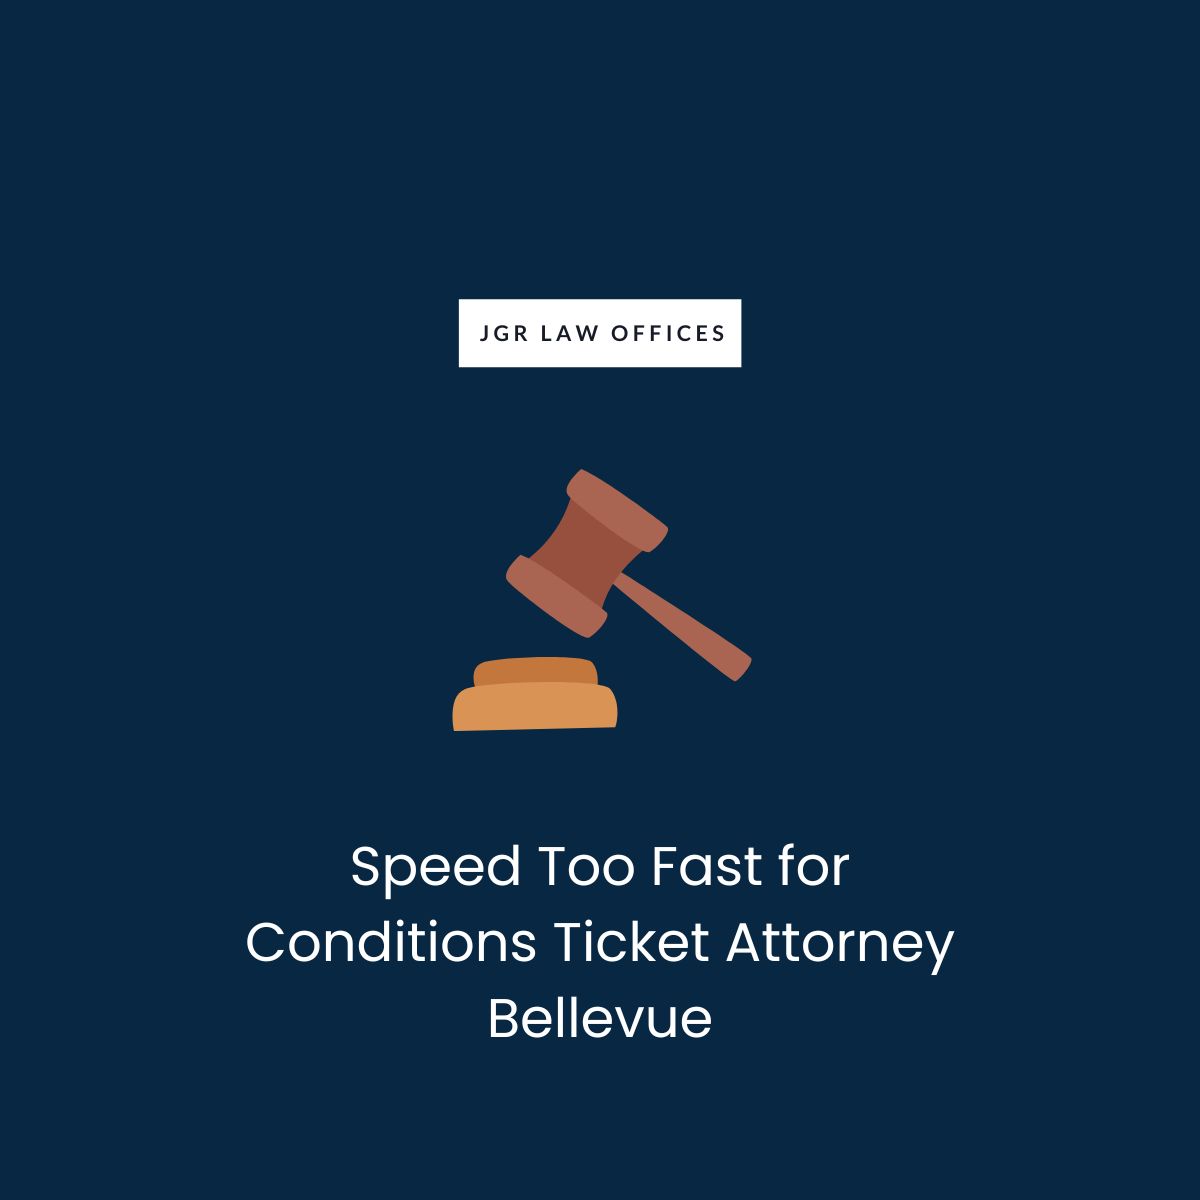 Speed Too Fast for Conditions Ticket Attorney Bellevue